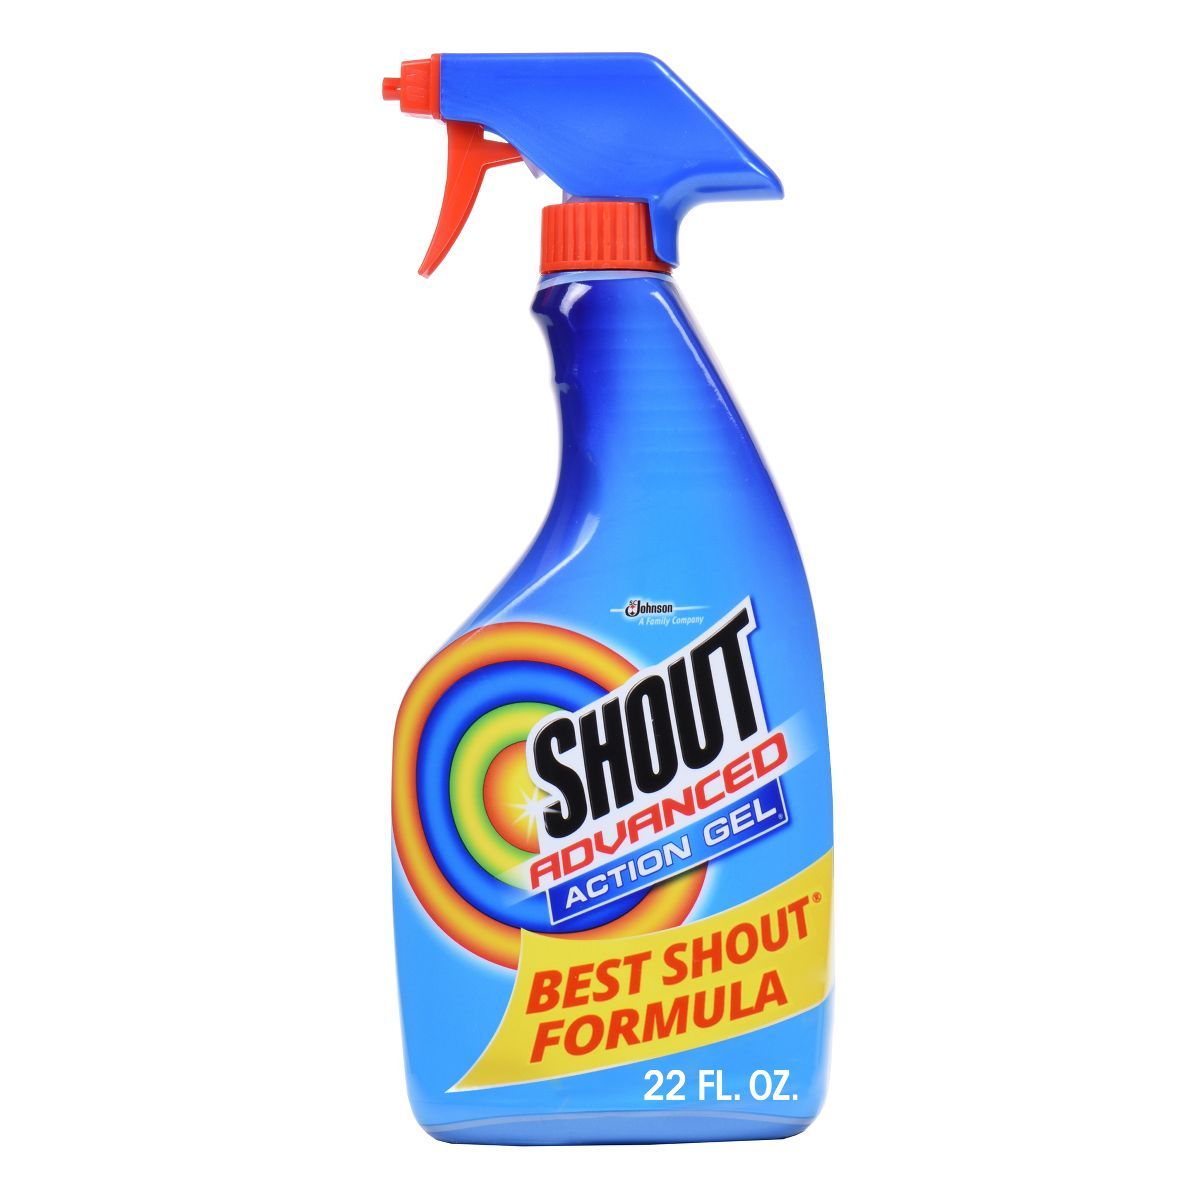 Shout Advanced Action Gel Laundry Stain Remover Spray - 22 fl oz | Target